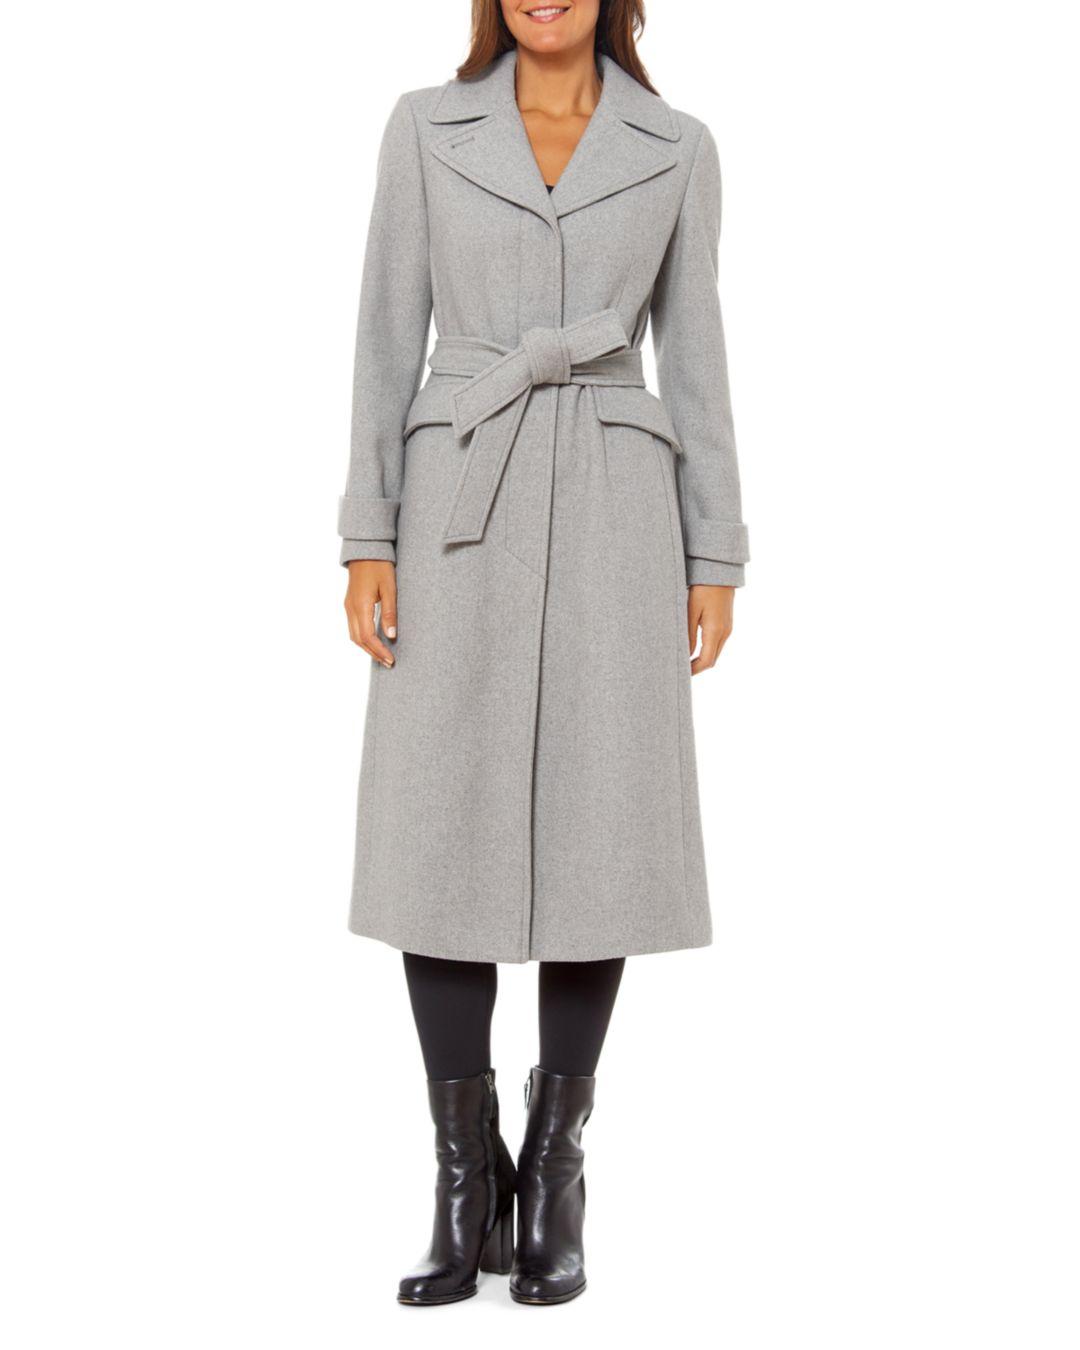 Kate Spade Wool Belted Long Coat in Heather Gray (Gray) - Save 20% - Lyst